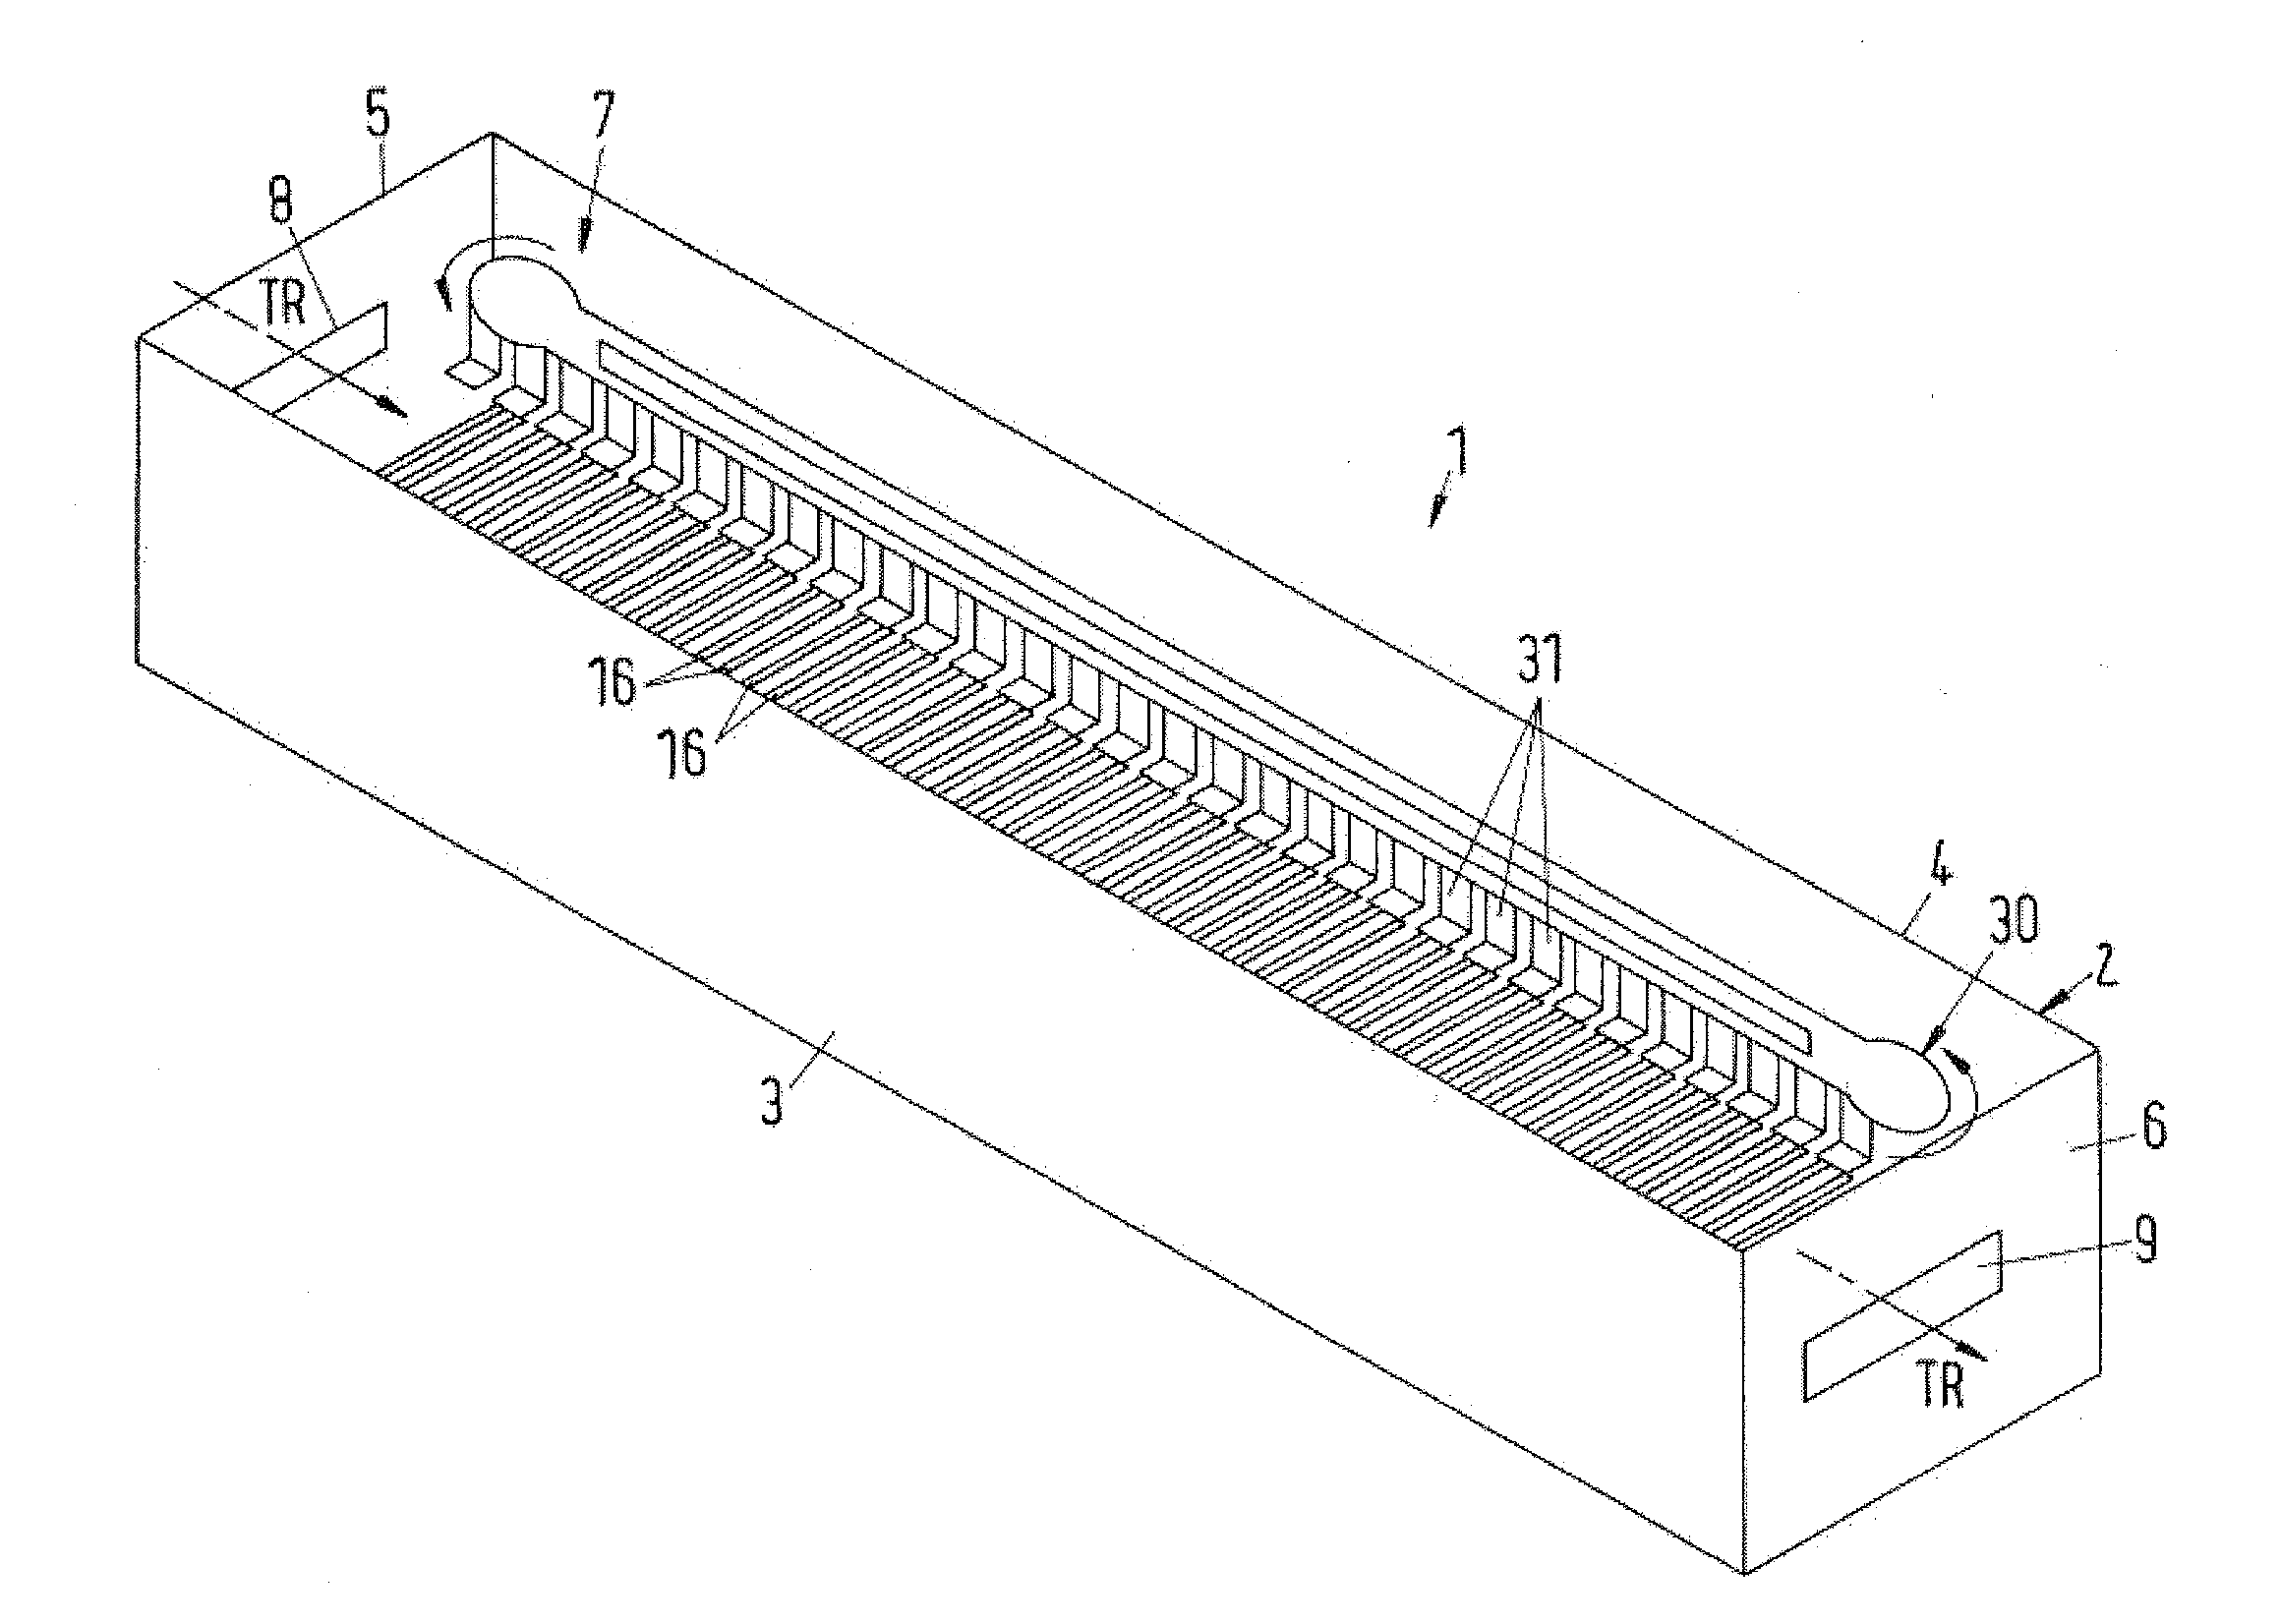 Method and apparatus for electrolytically depositing a deposition metal on a workpiece